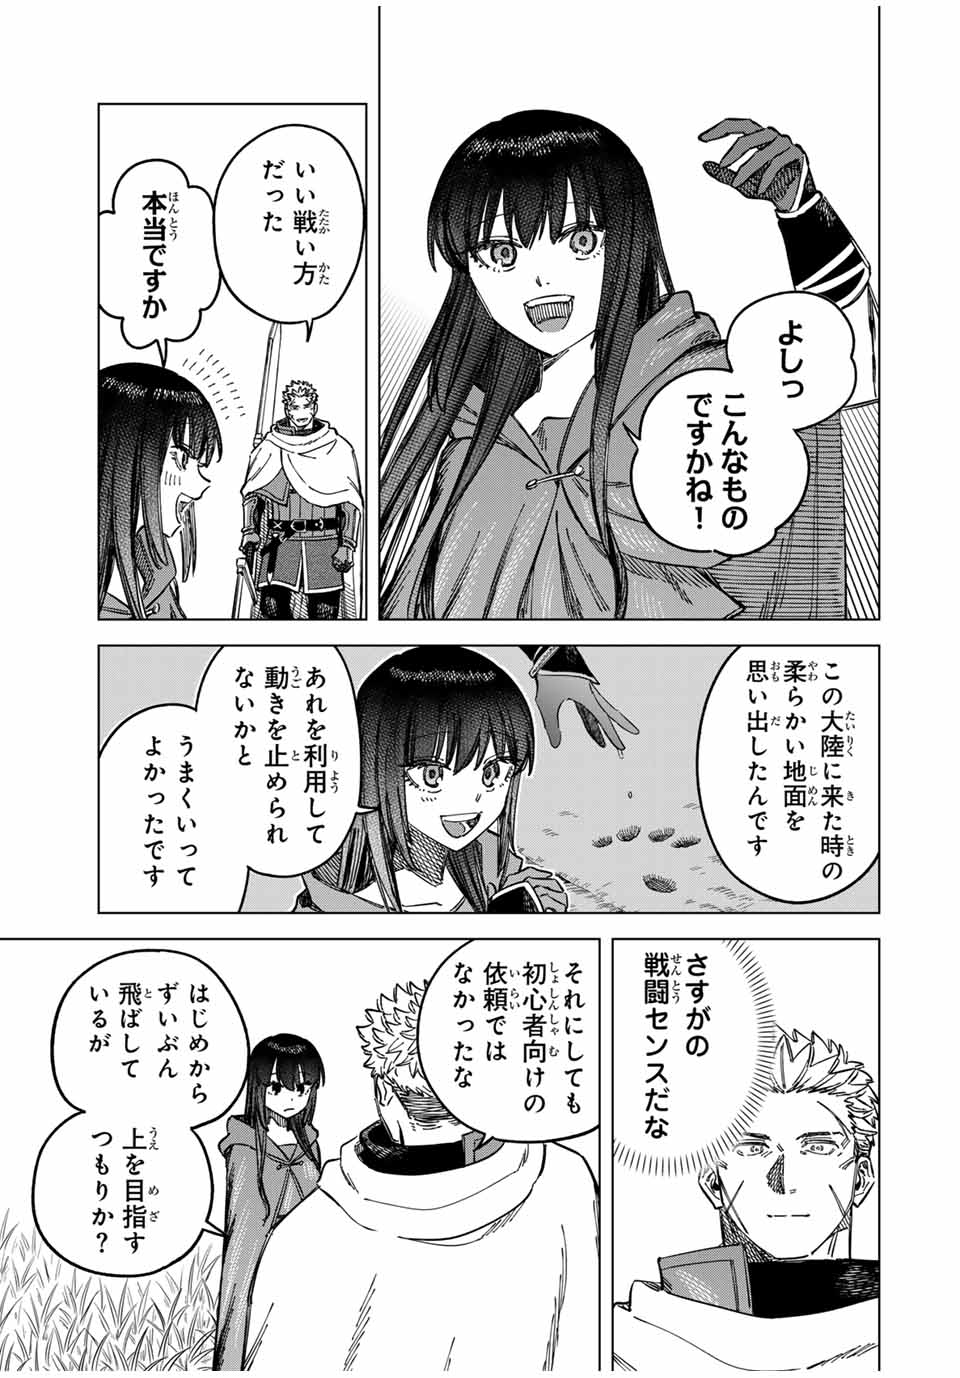 Witch and Mercenary 魔女と傭兵 第5.5話 - Page 7